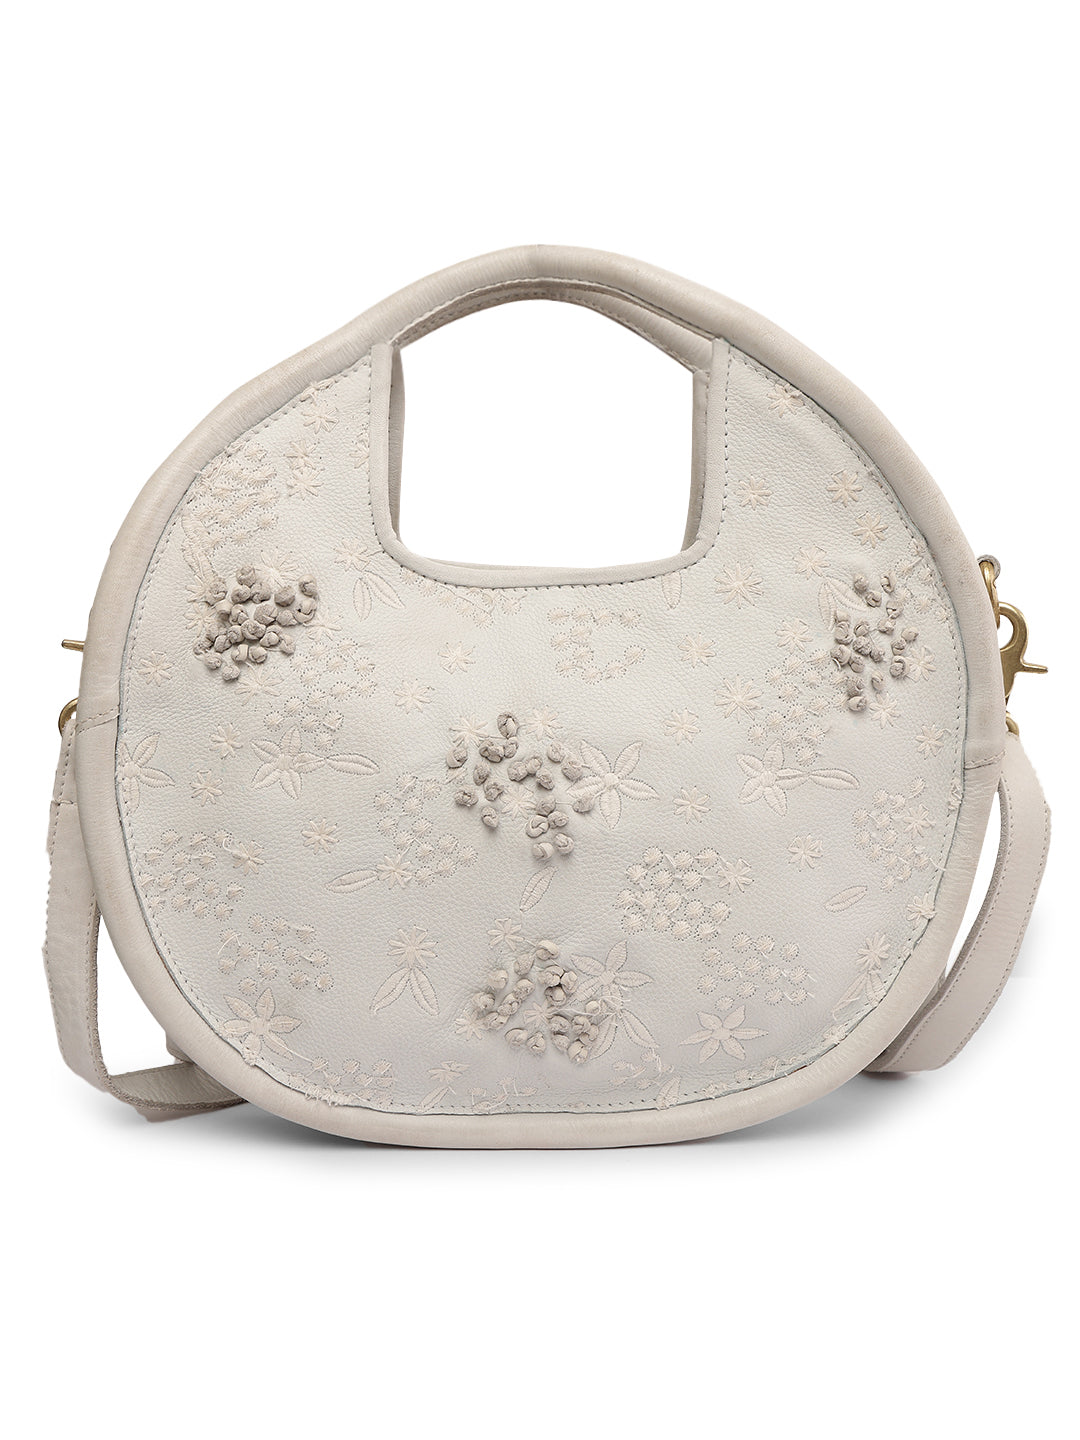 Floral Bliss: Round White Leather Handbag with Flower Embroidery